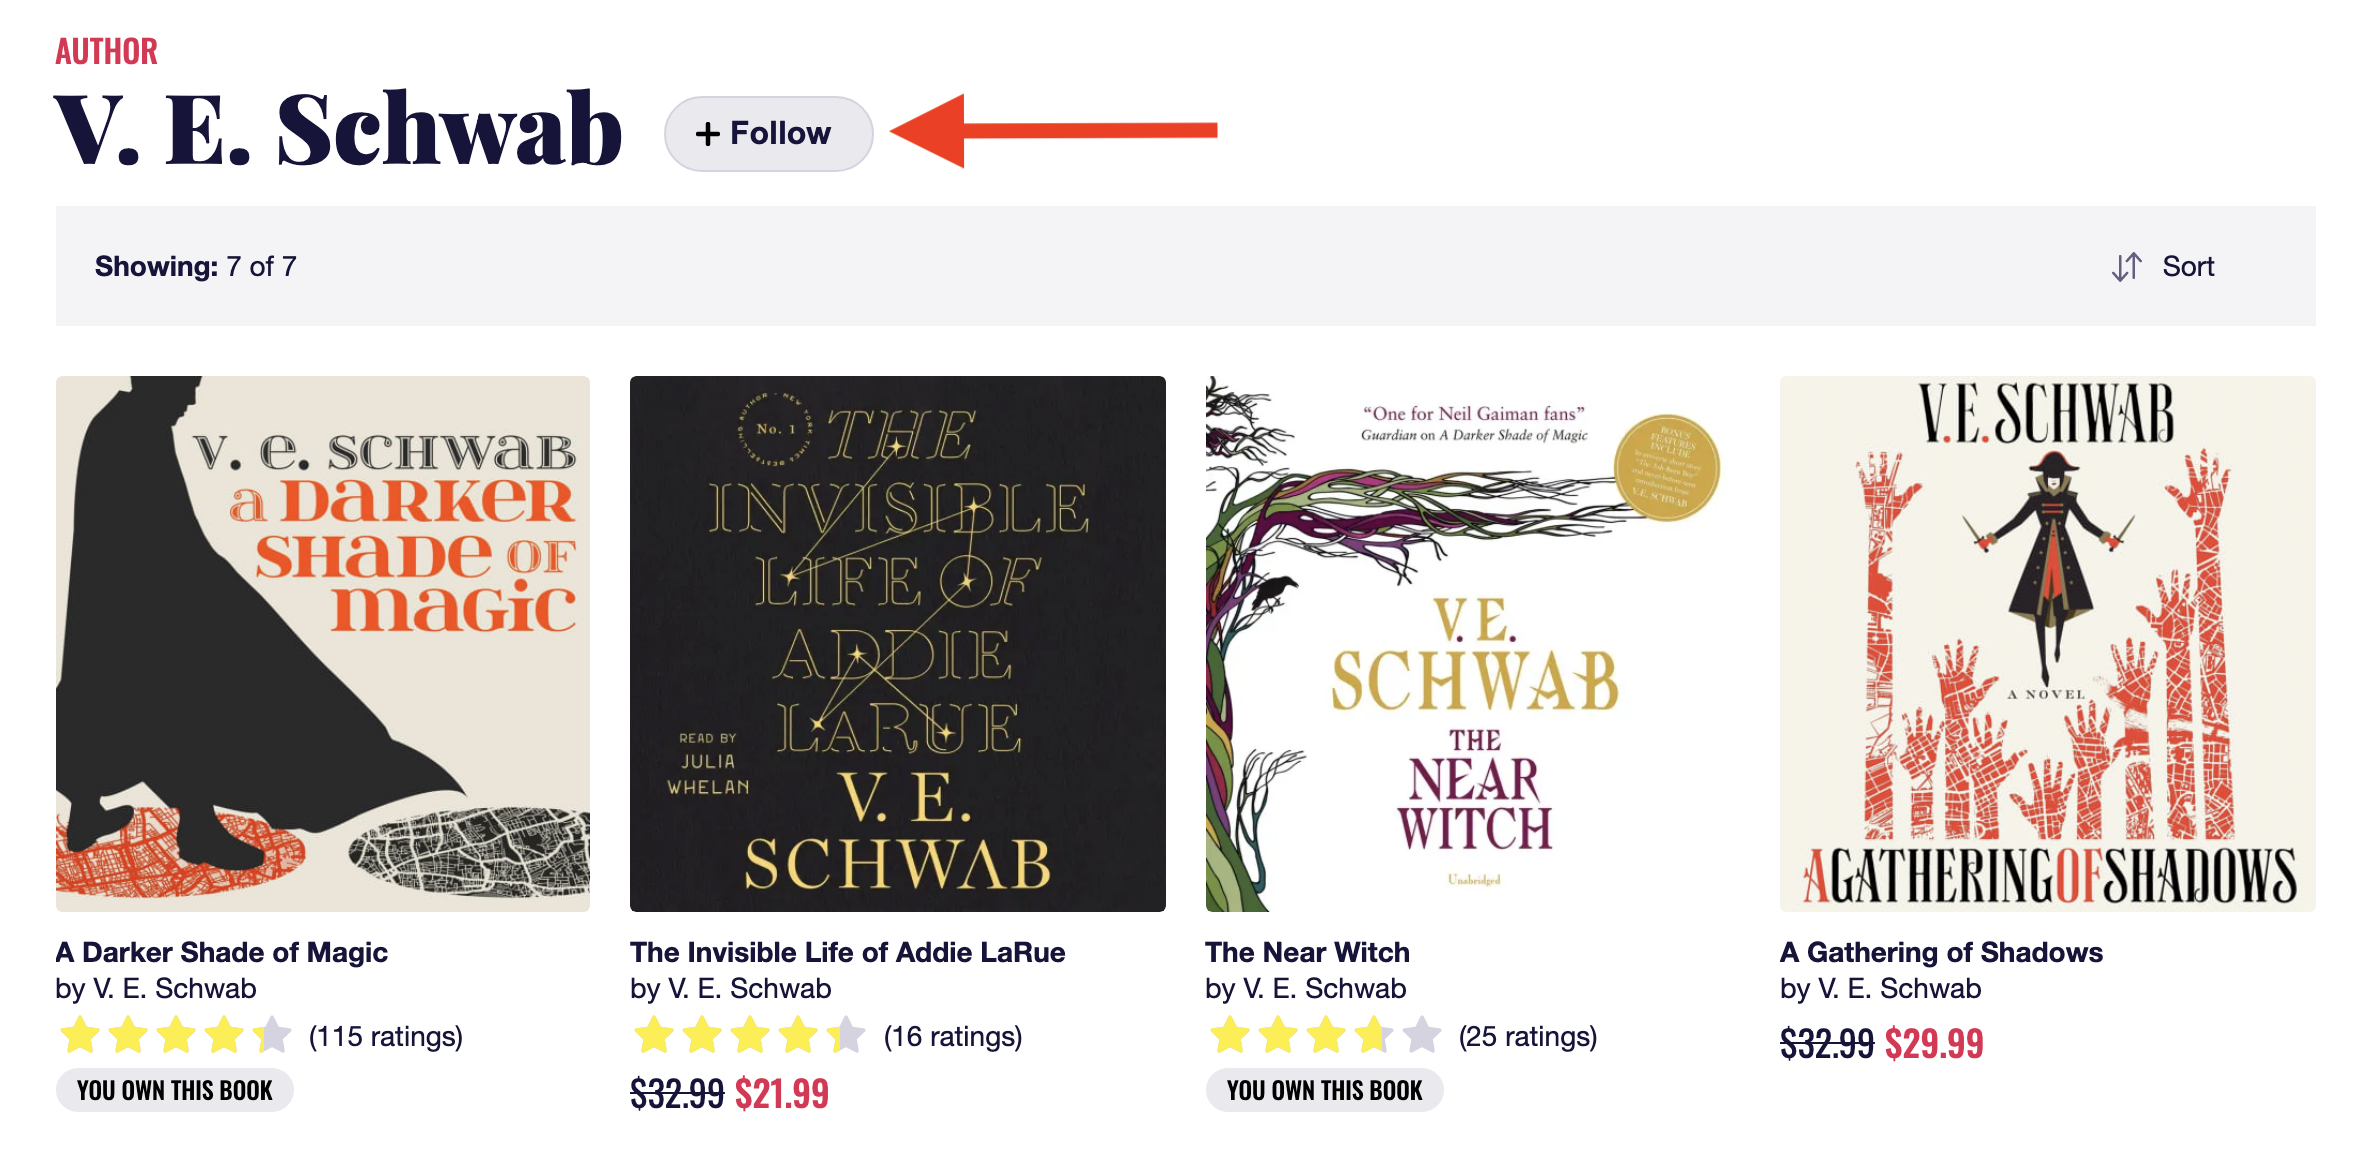 V.E. Schwab’s author page on Chirp, with a red arrow pointing to the follow button